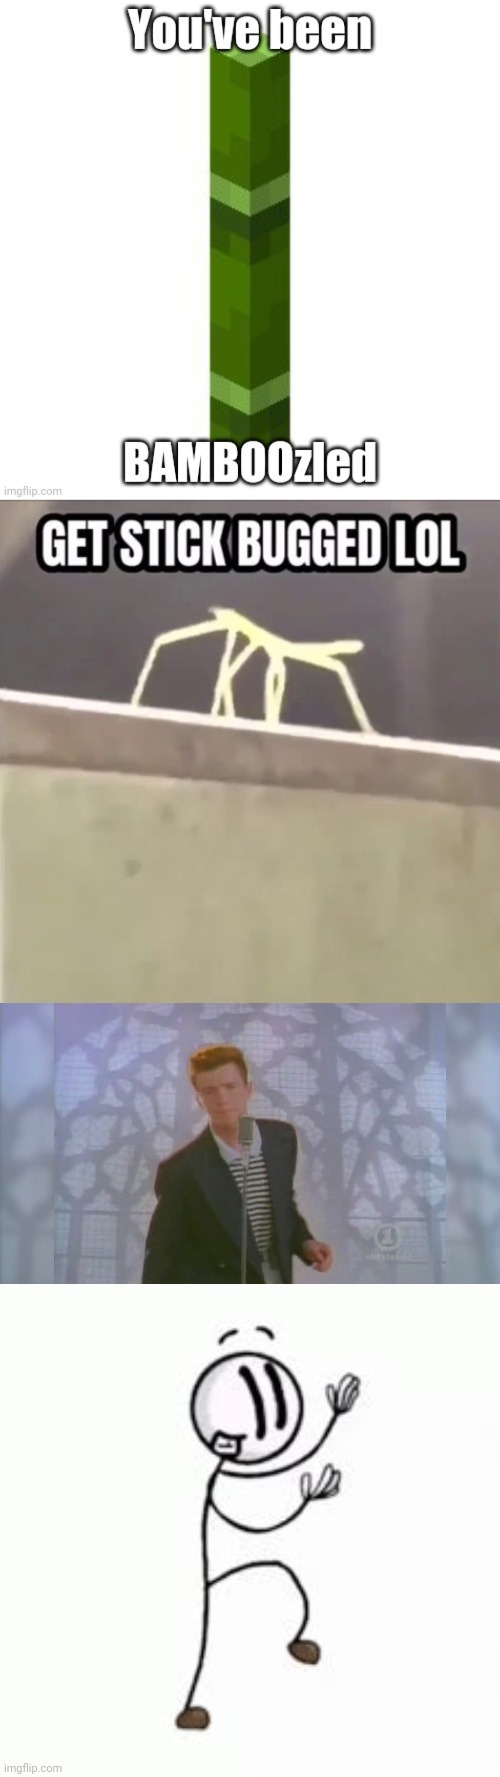 Get distracted by rick stick bamboozled | image tagged in bamboozled,get stick bugged lol,rick roll,distraction dance | made w/ Imgflip meme maker